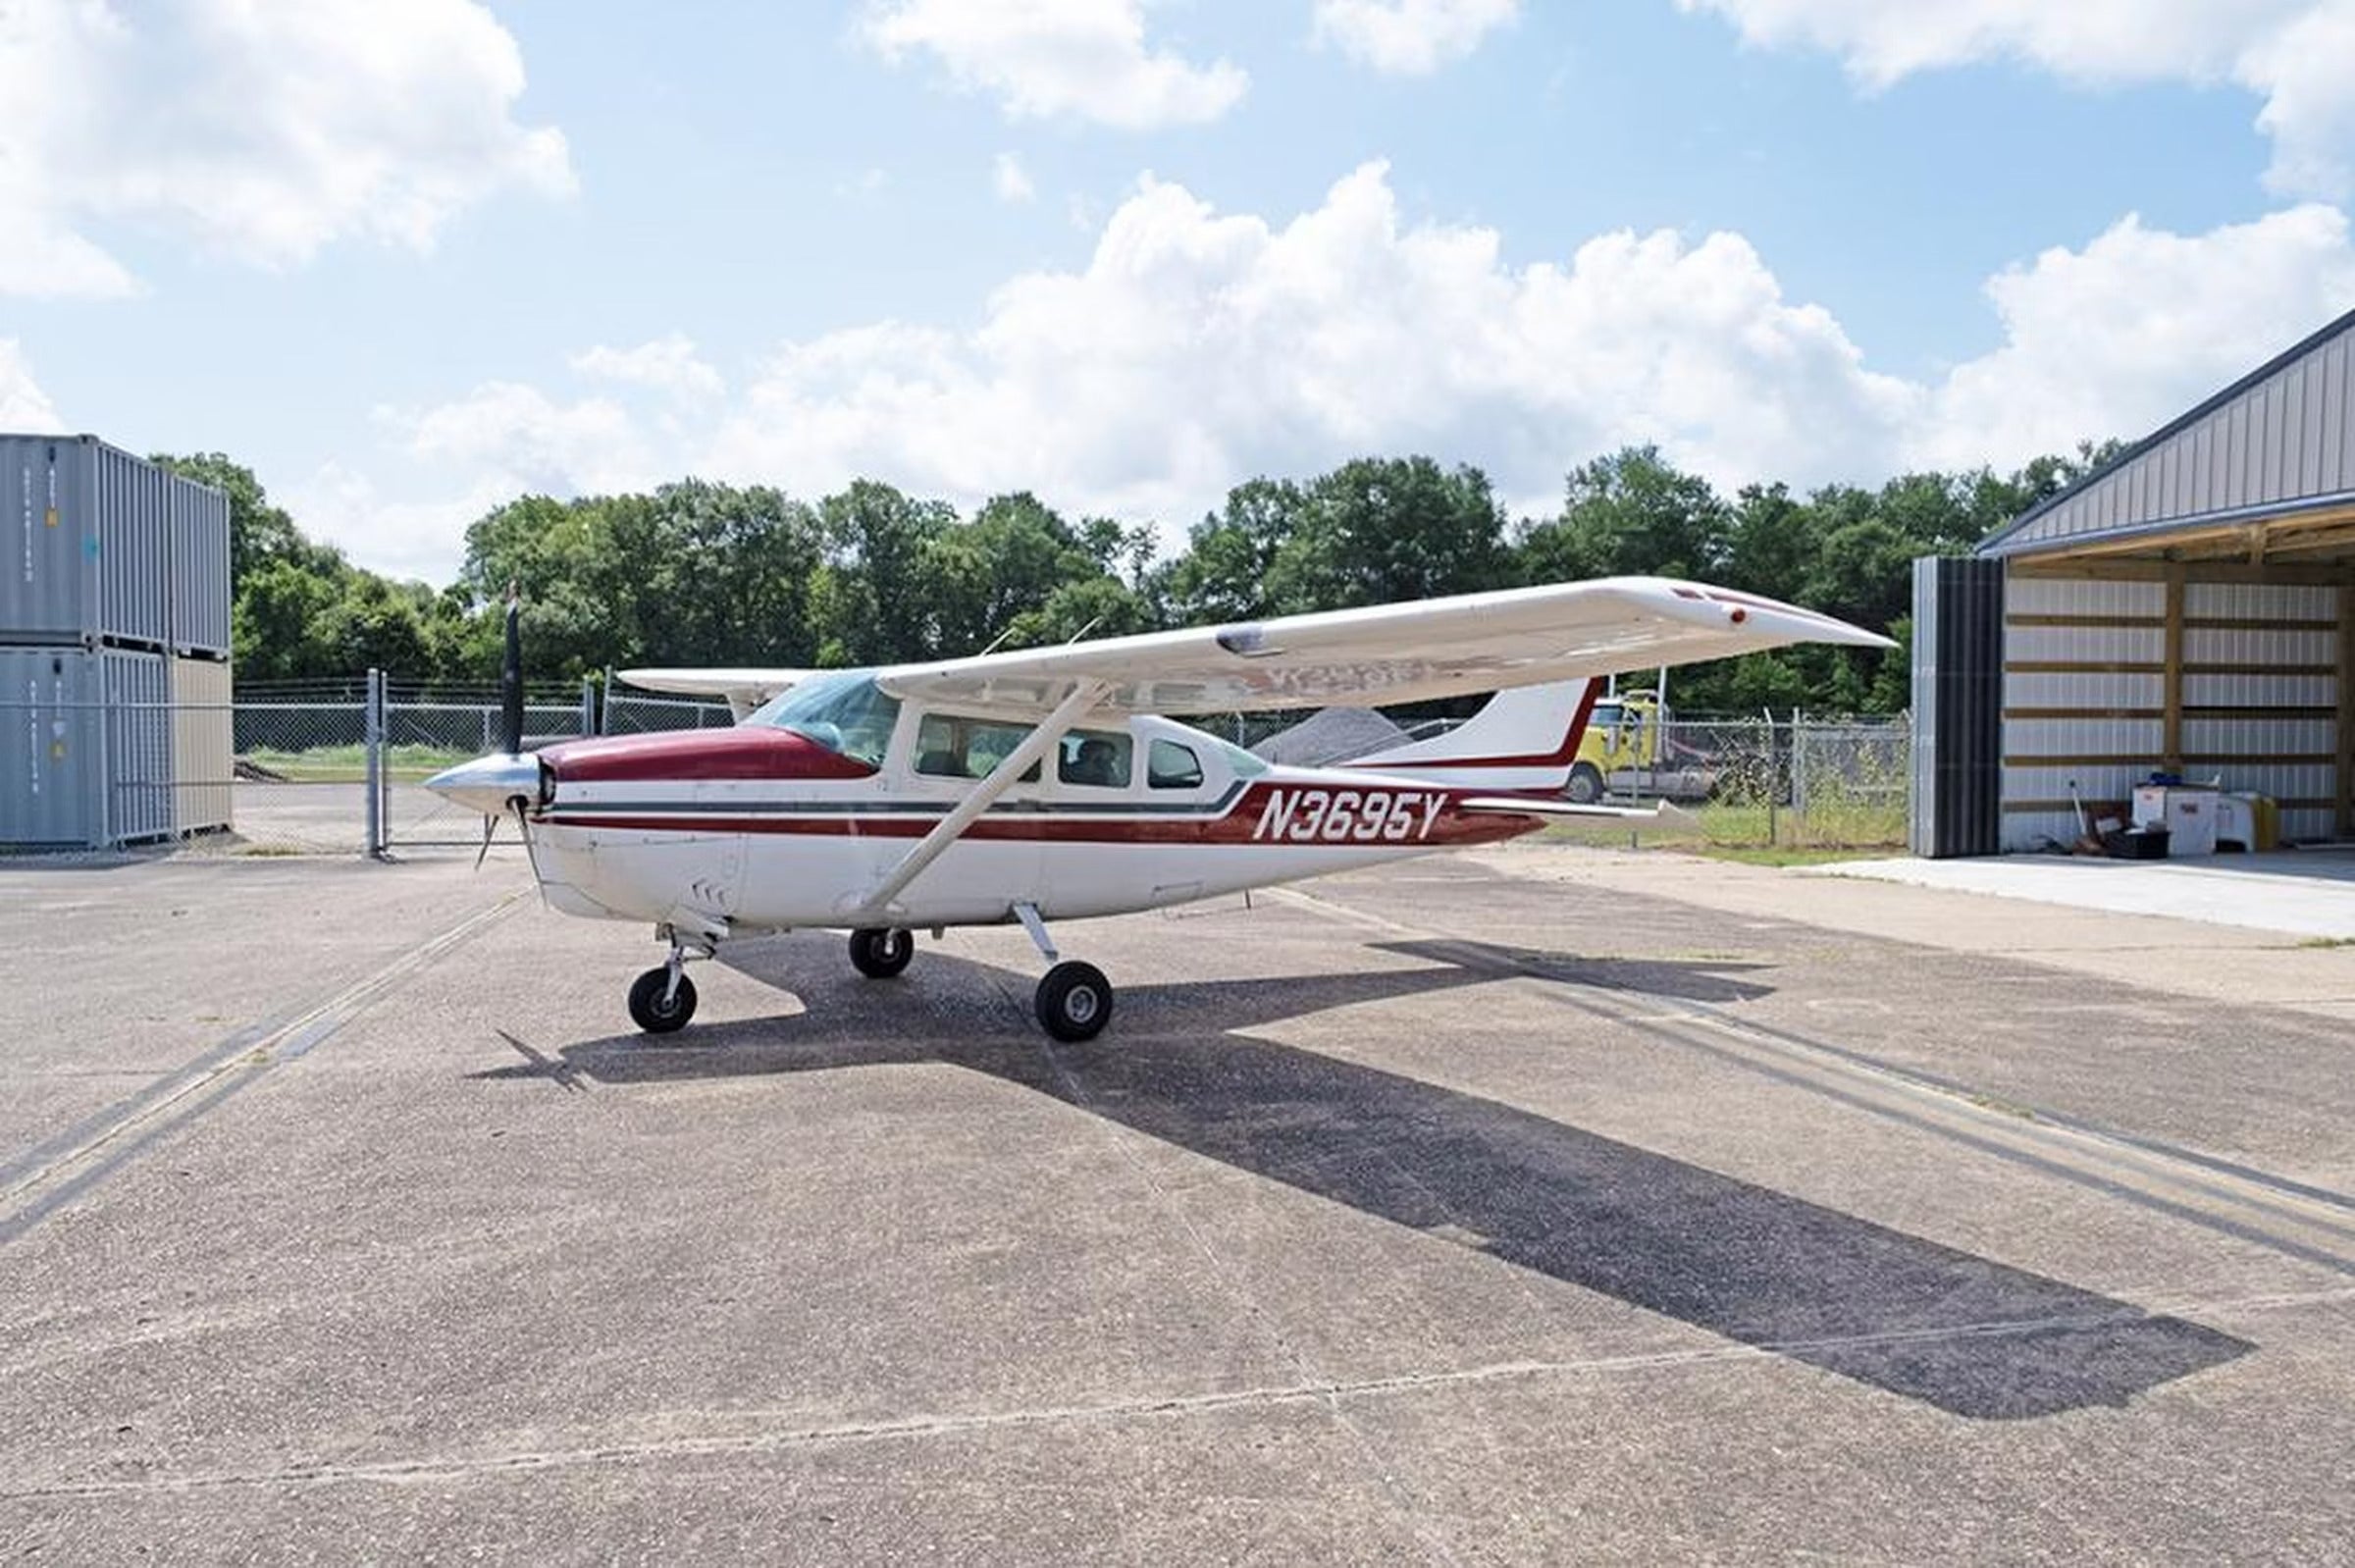 Today’s Top Aircraft For Sale Pick: 1963 Cessna 210C Centurion